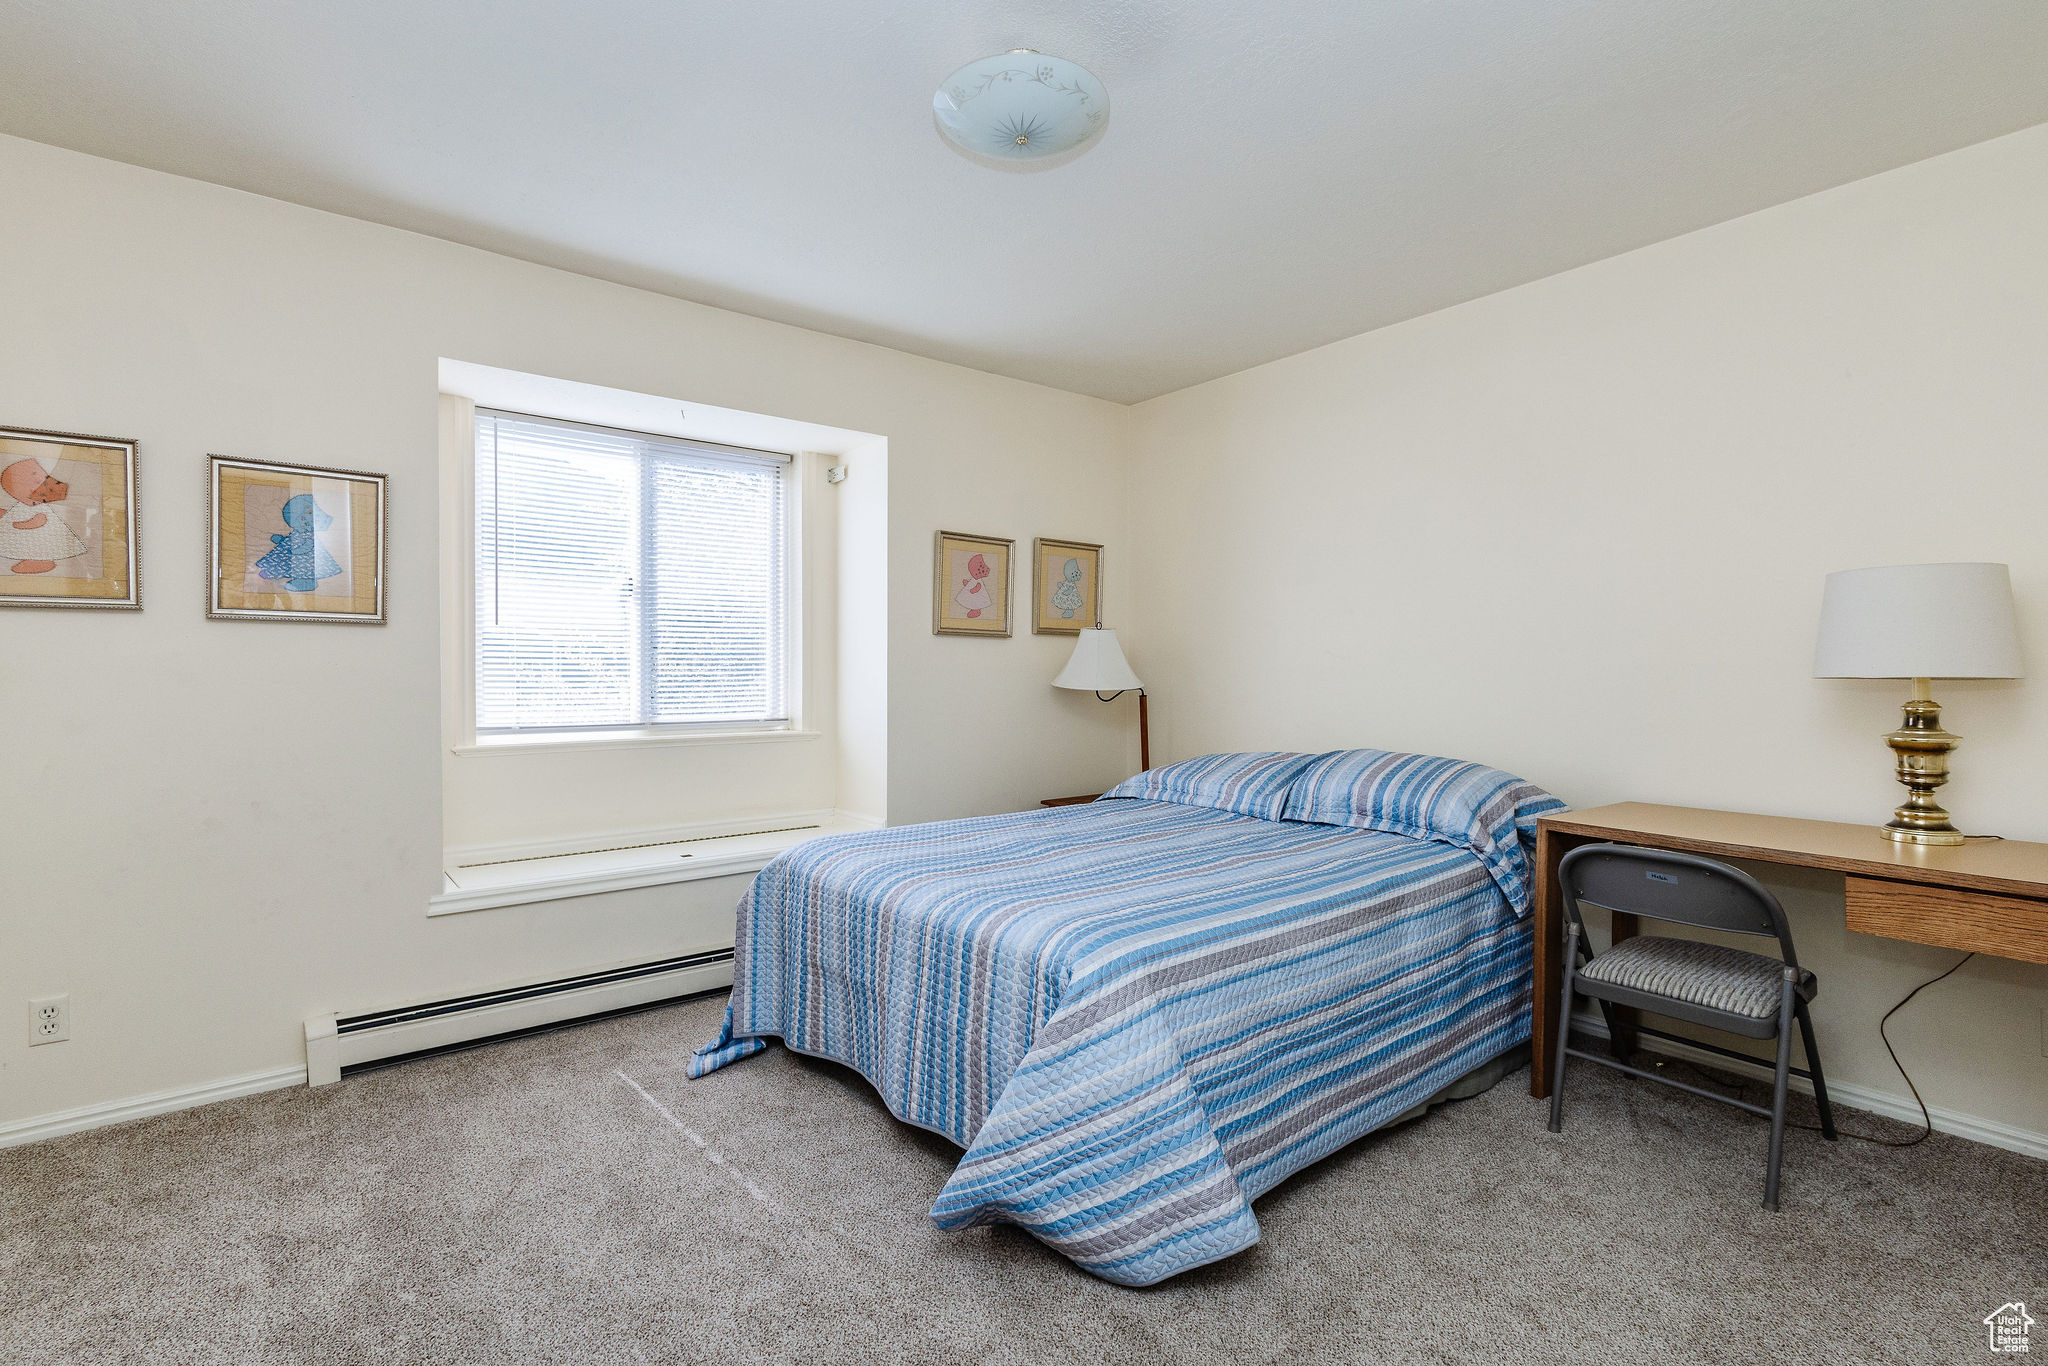 Bedroom with a baseboard heating unit and carpet floors